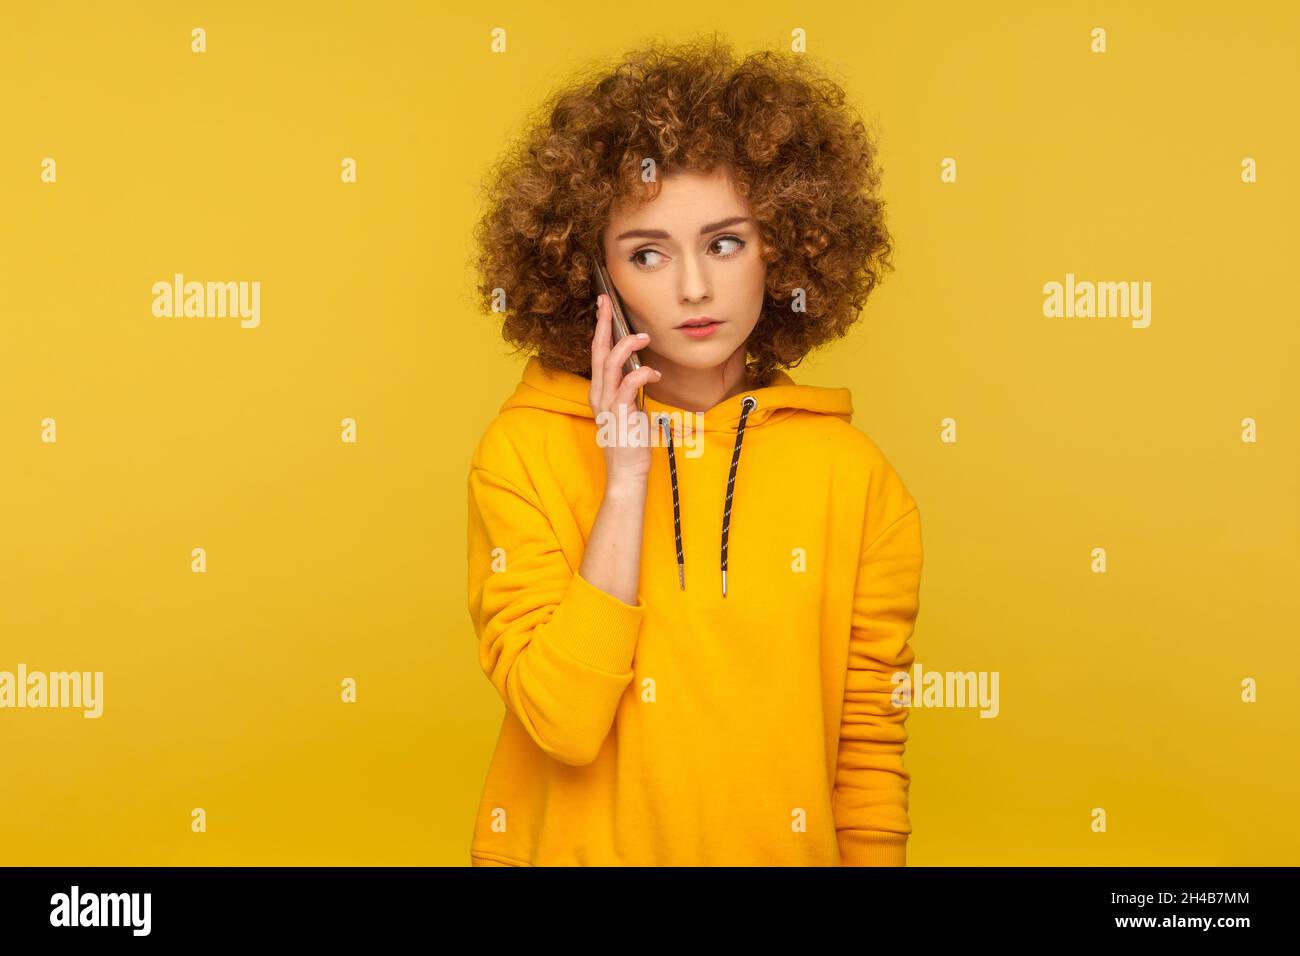 Serious woman with Afro hairstyle using mobile phone, making call and talking with friend, connection, wearing casual style hoodie. Indoor studio shot isolated on yellow background. Stock Photo